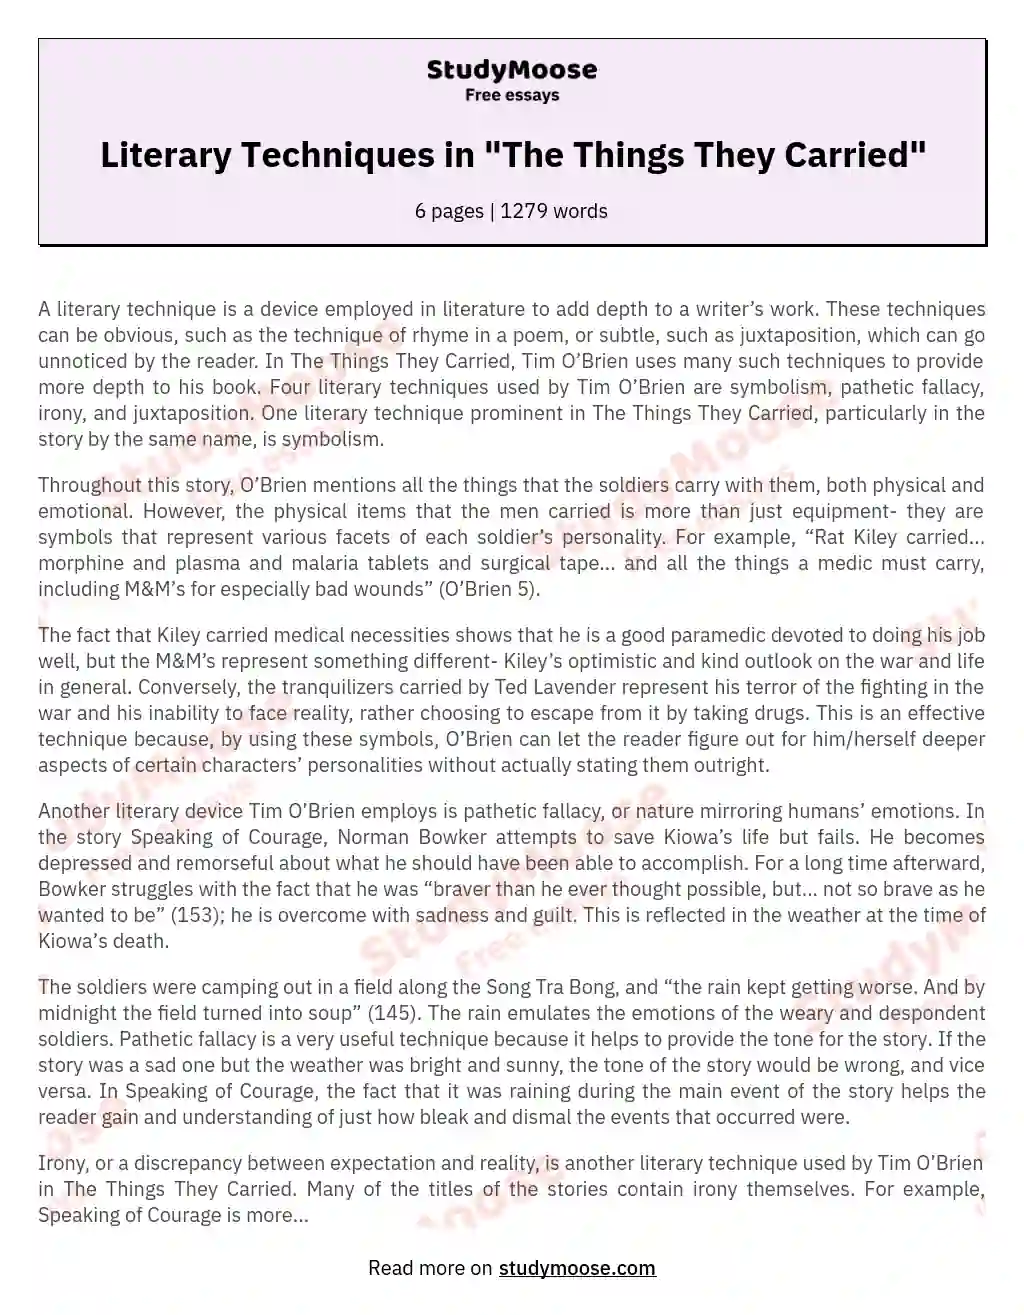 Literary Techniques in "The Things They Carried" essay